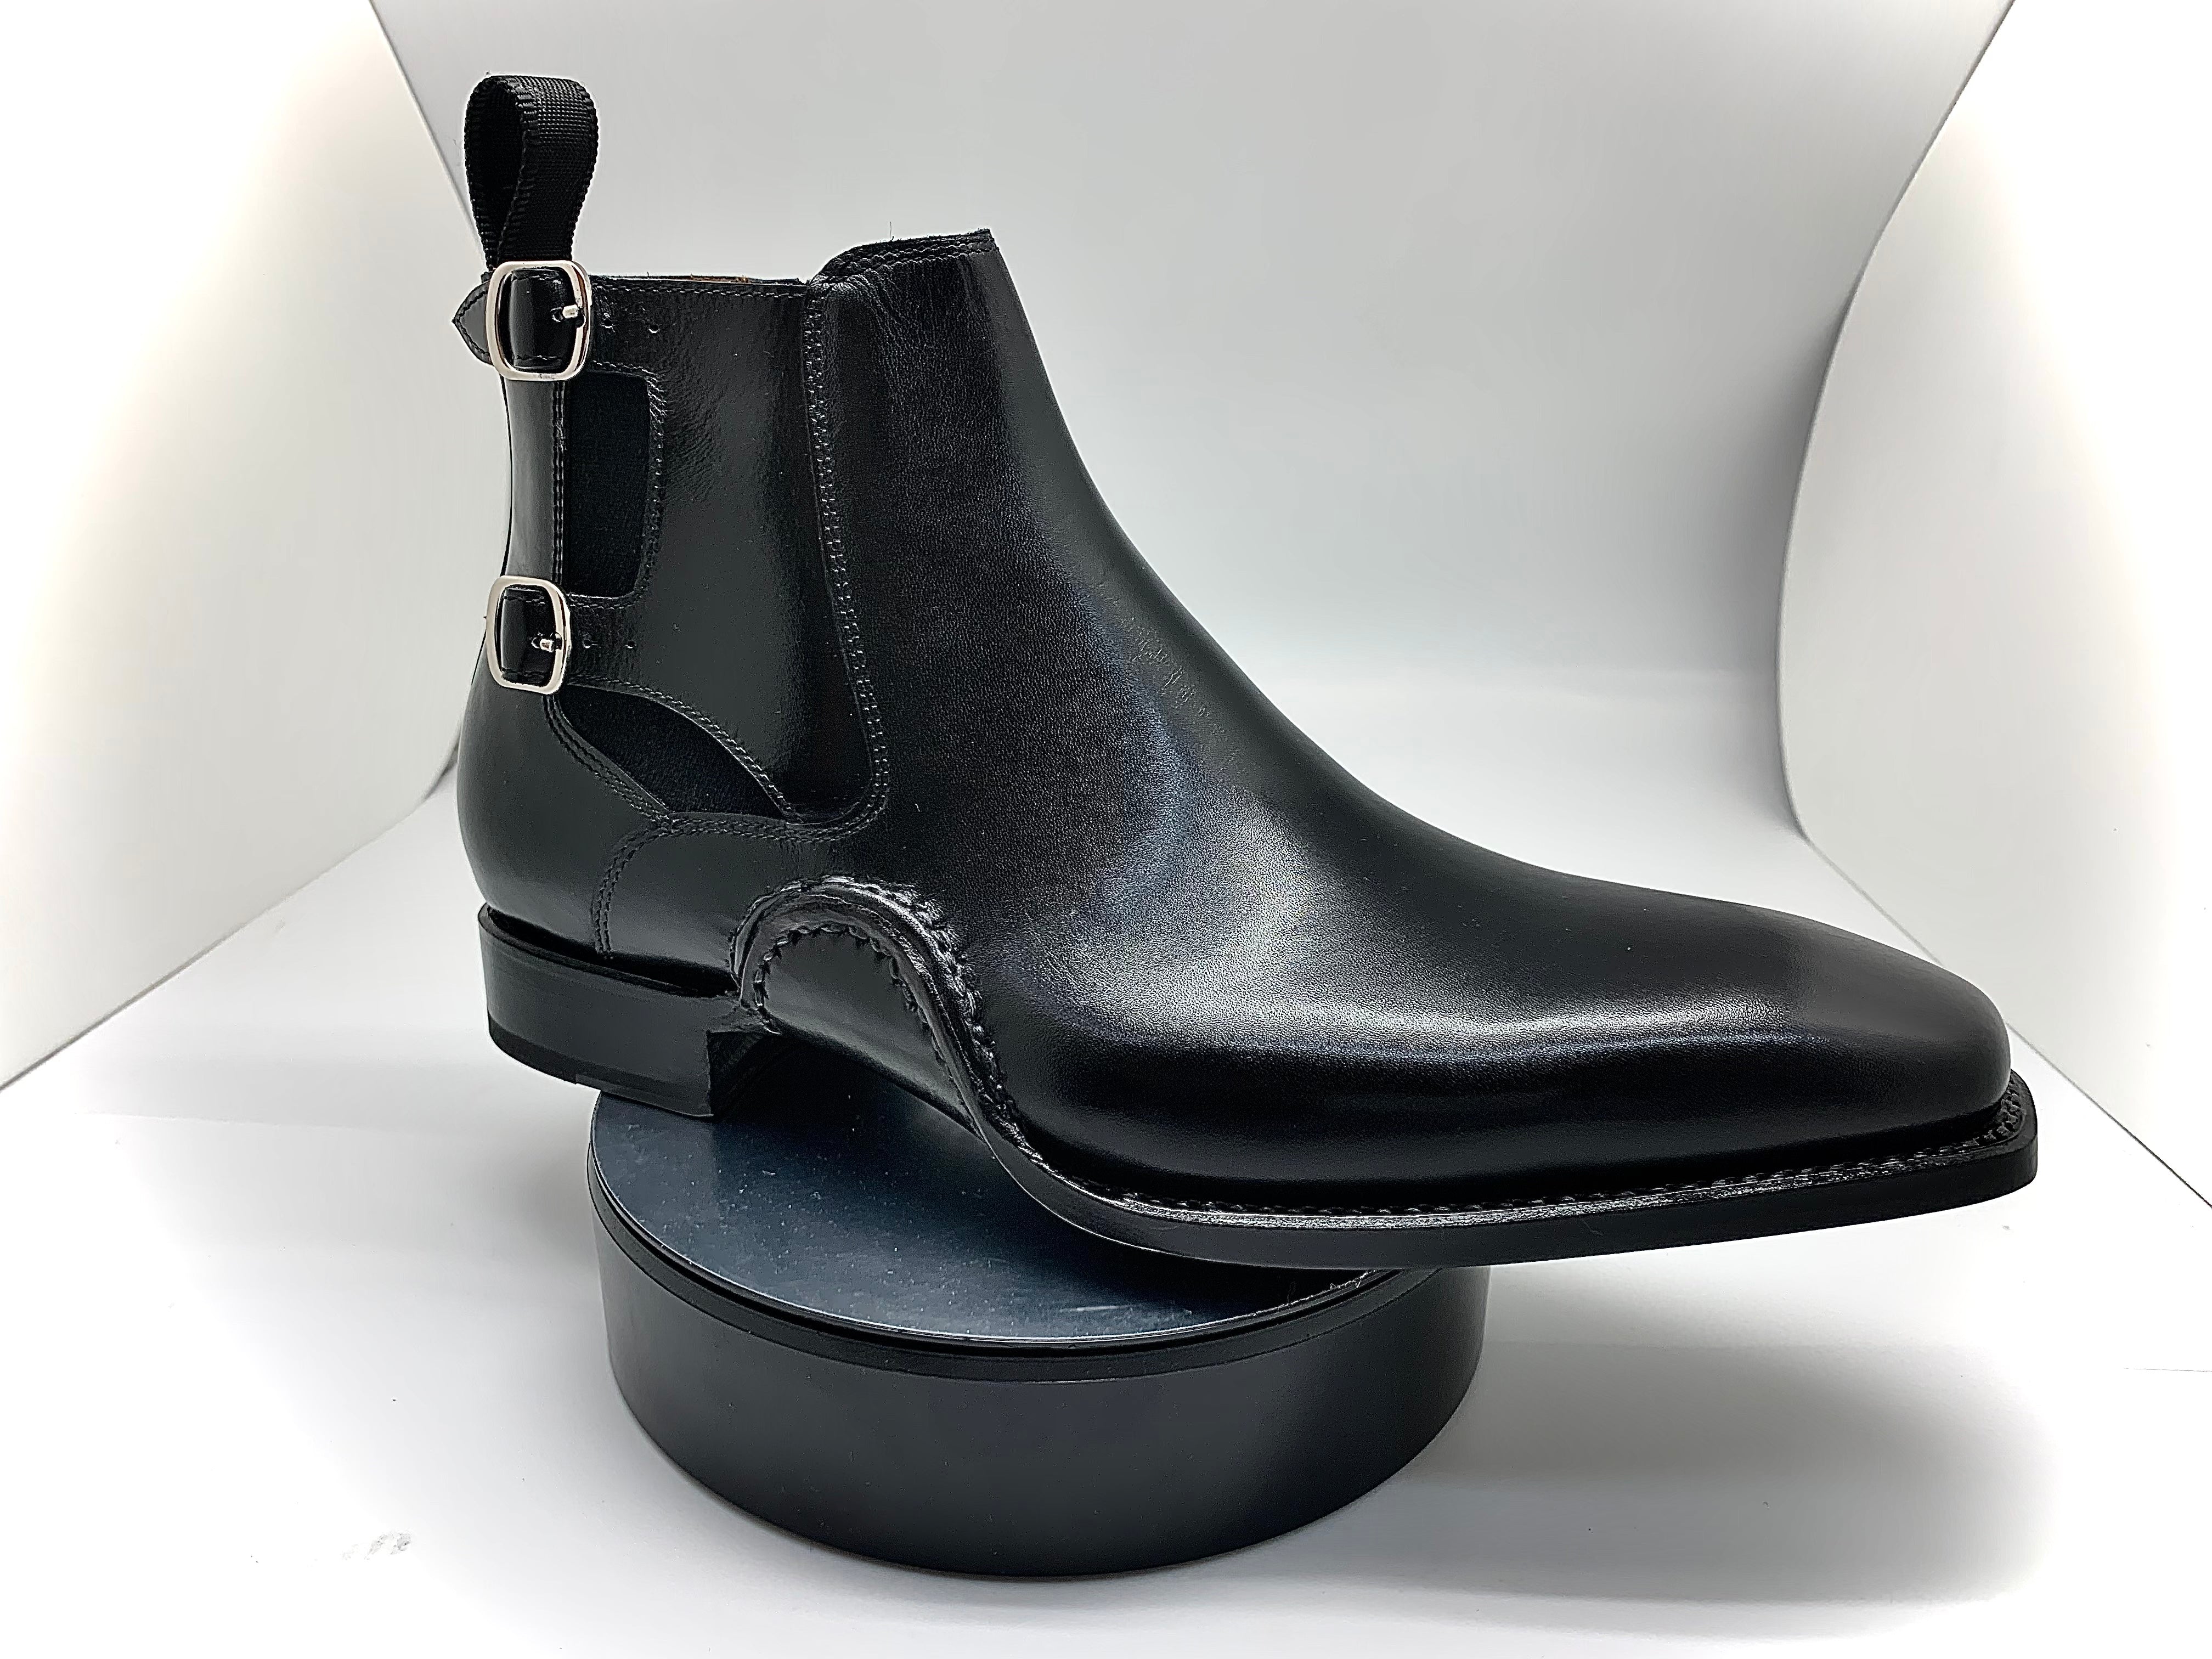 Stitch by Stitch Black Chelsea Boot w/Double Buckle